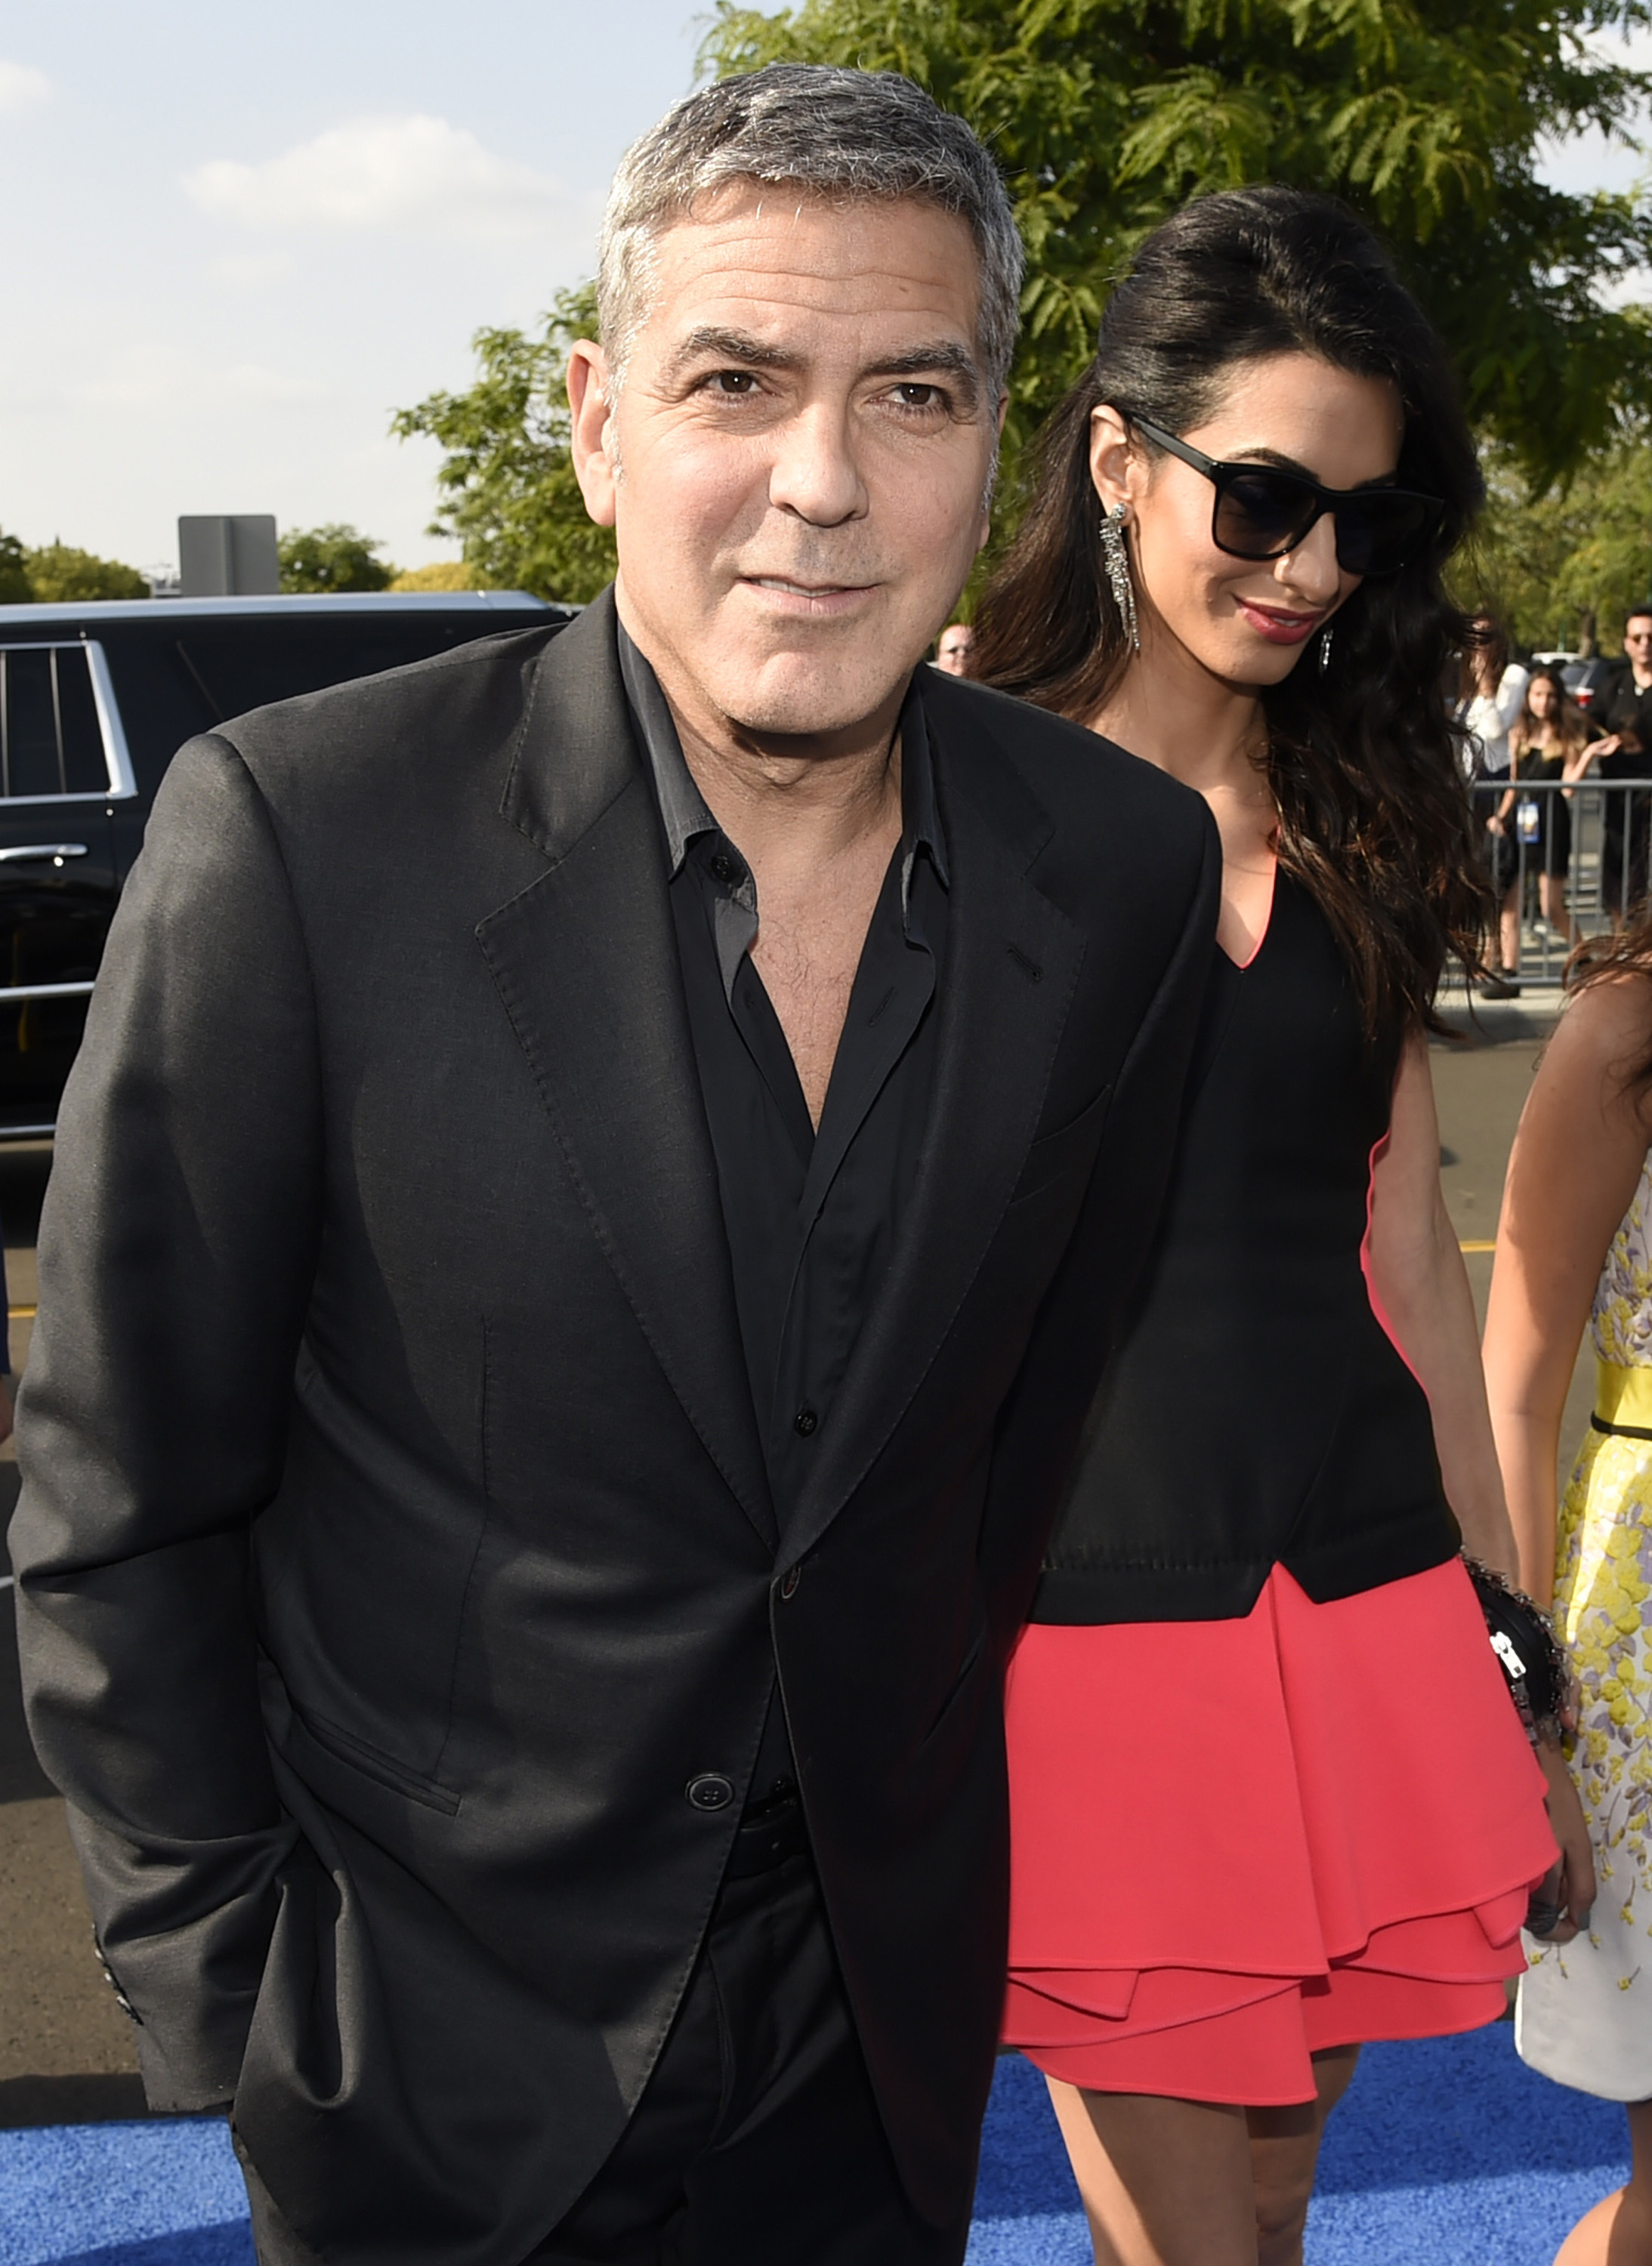 George Clooney and Amal Clooney arrive at the world premiere of "Tomorrowland" at AMC Downtown Disney on May 9, 2015, in Anaheim, Calif. (Chris Pizzello—Invision/AP)